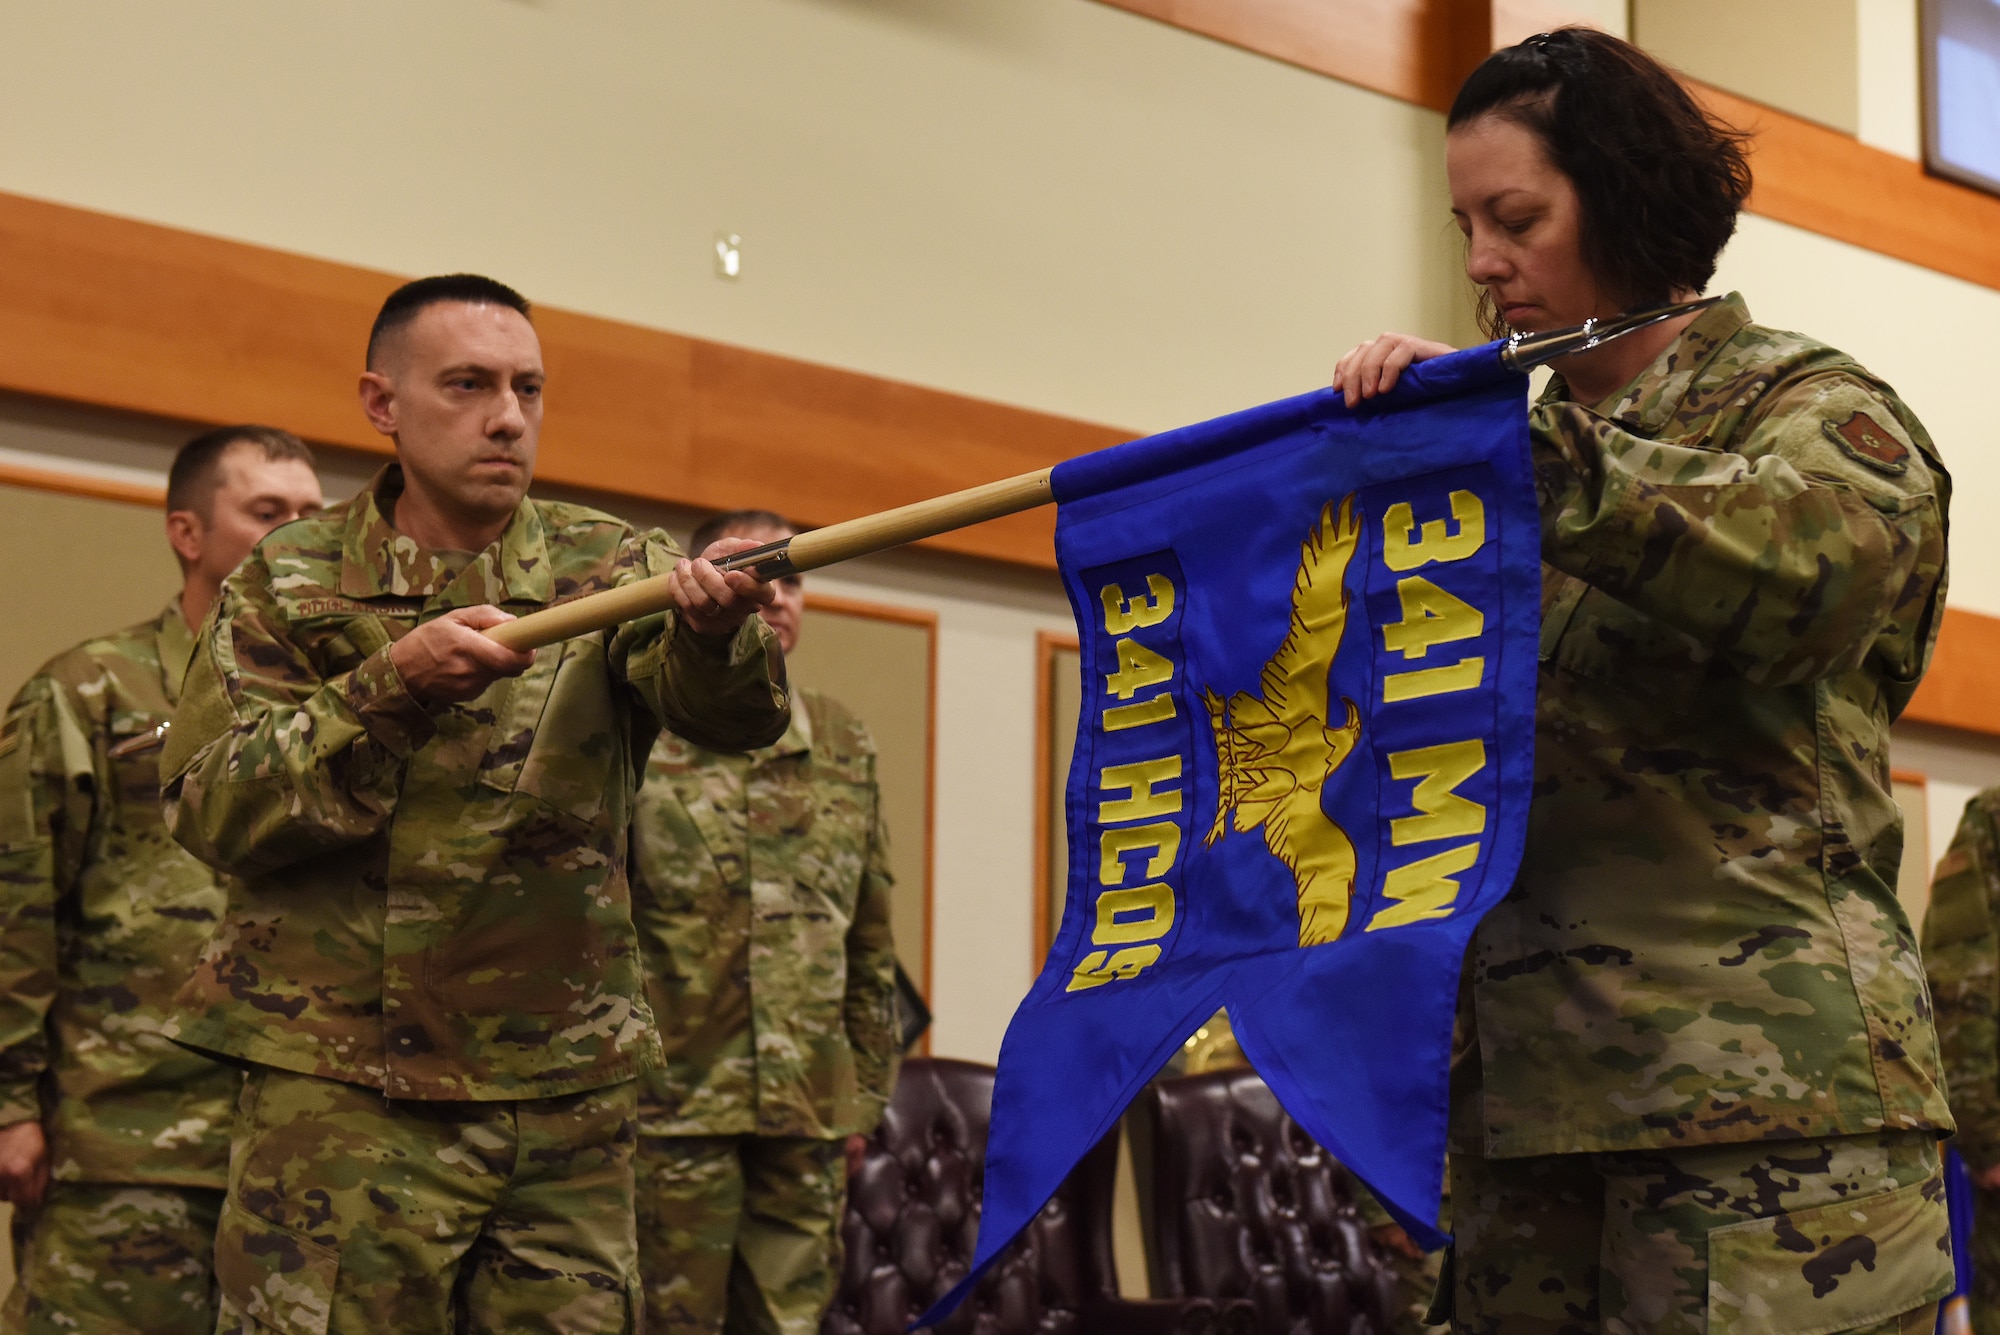 Lt. Col. Stephen Boglarski, 341st Healthcare Operations Squadron commander, left, and Master Sergeant Kimberly Severyn, 341st HCOS superintendent, unfurl the HCOS guidon August 16, 2019, at the Grizzly Bend on Malmstrom Air Force Base, Mont.